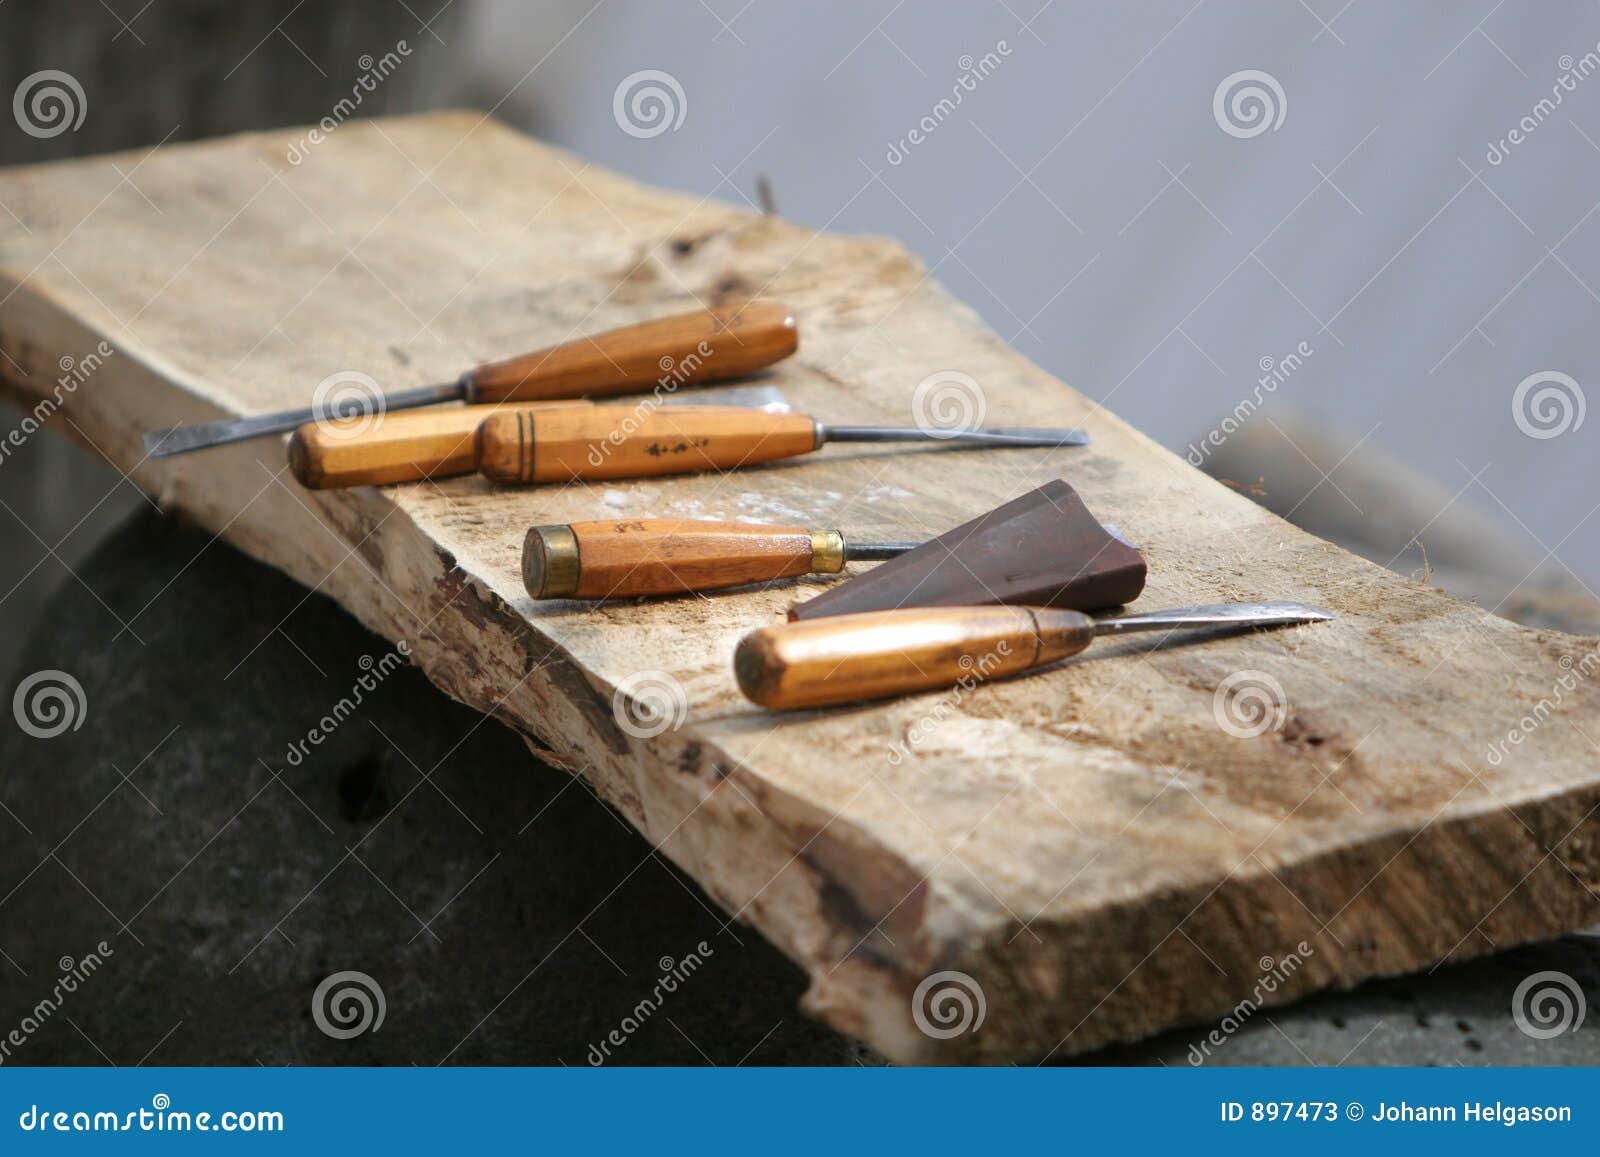 Search Results - WoodworkersWorkshop